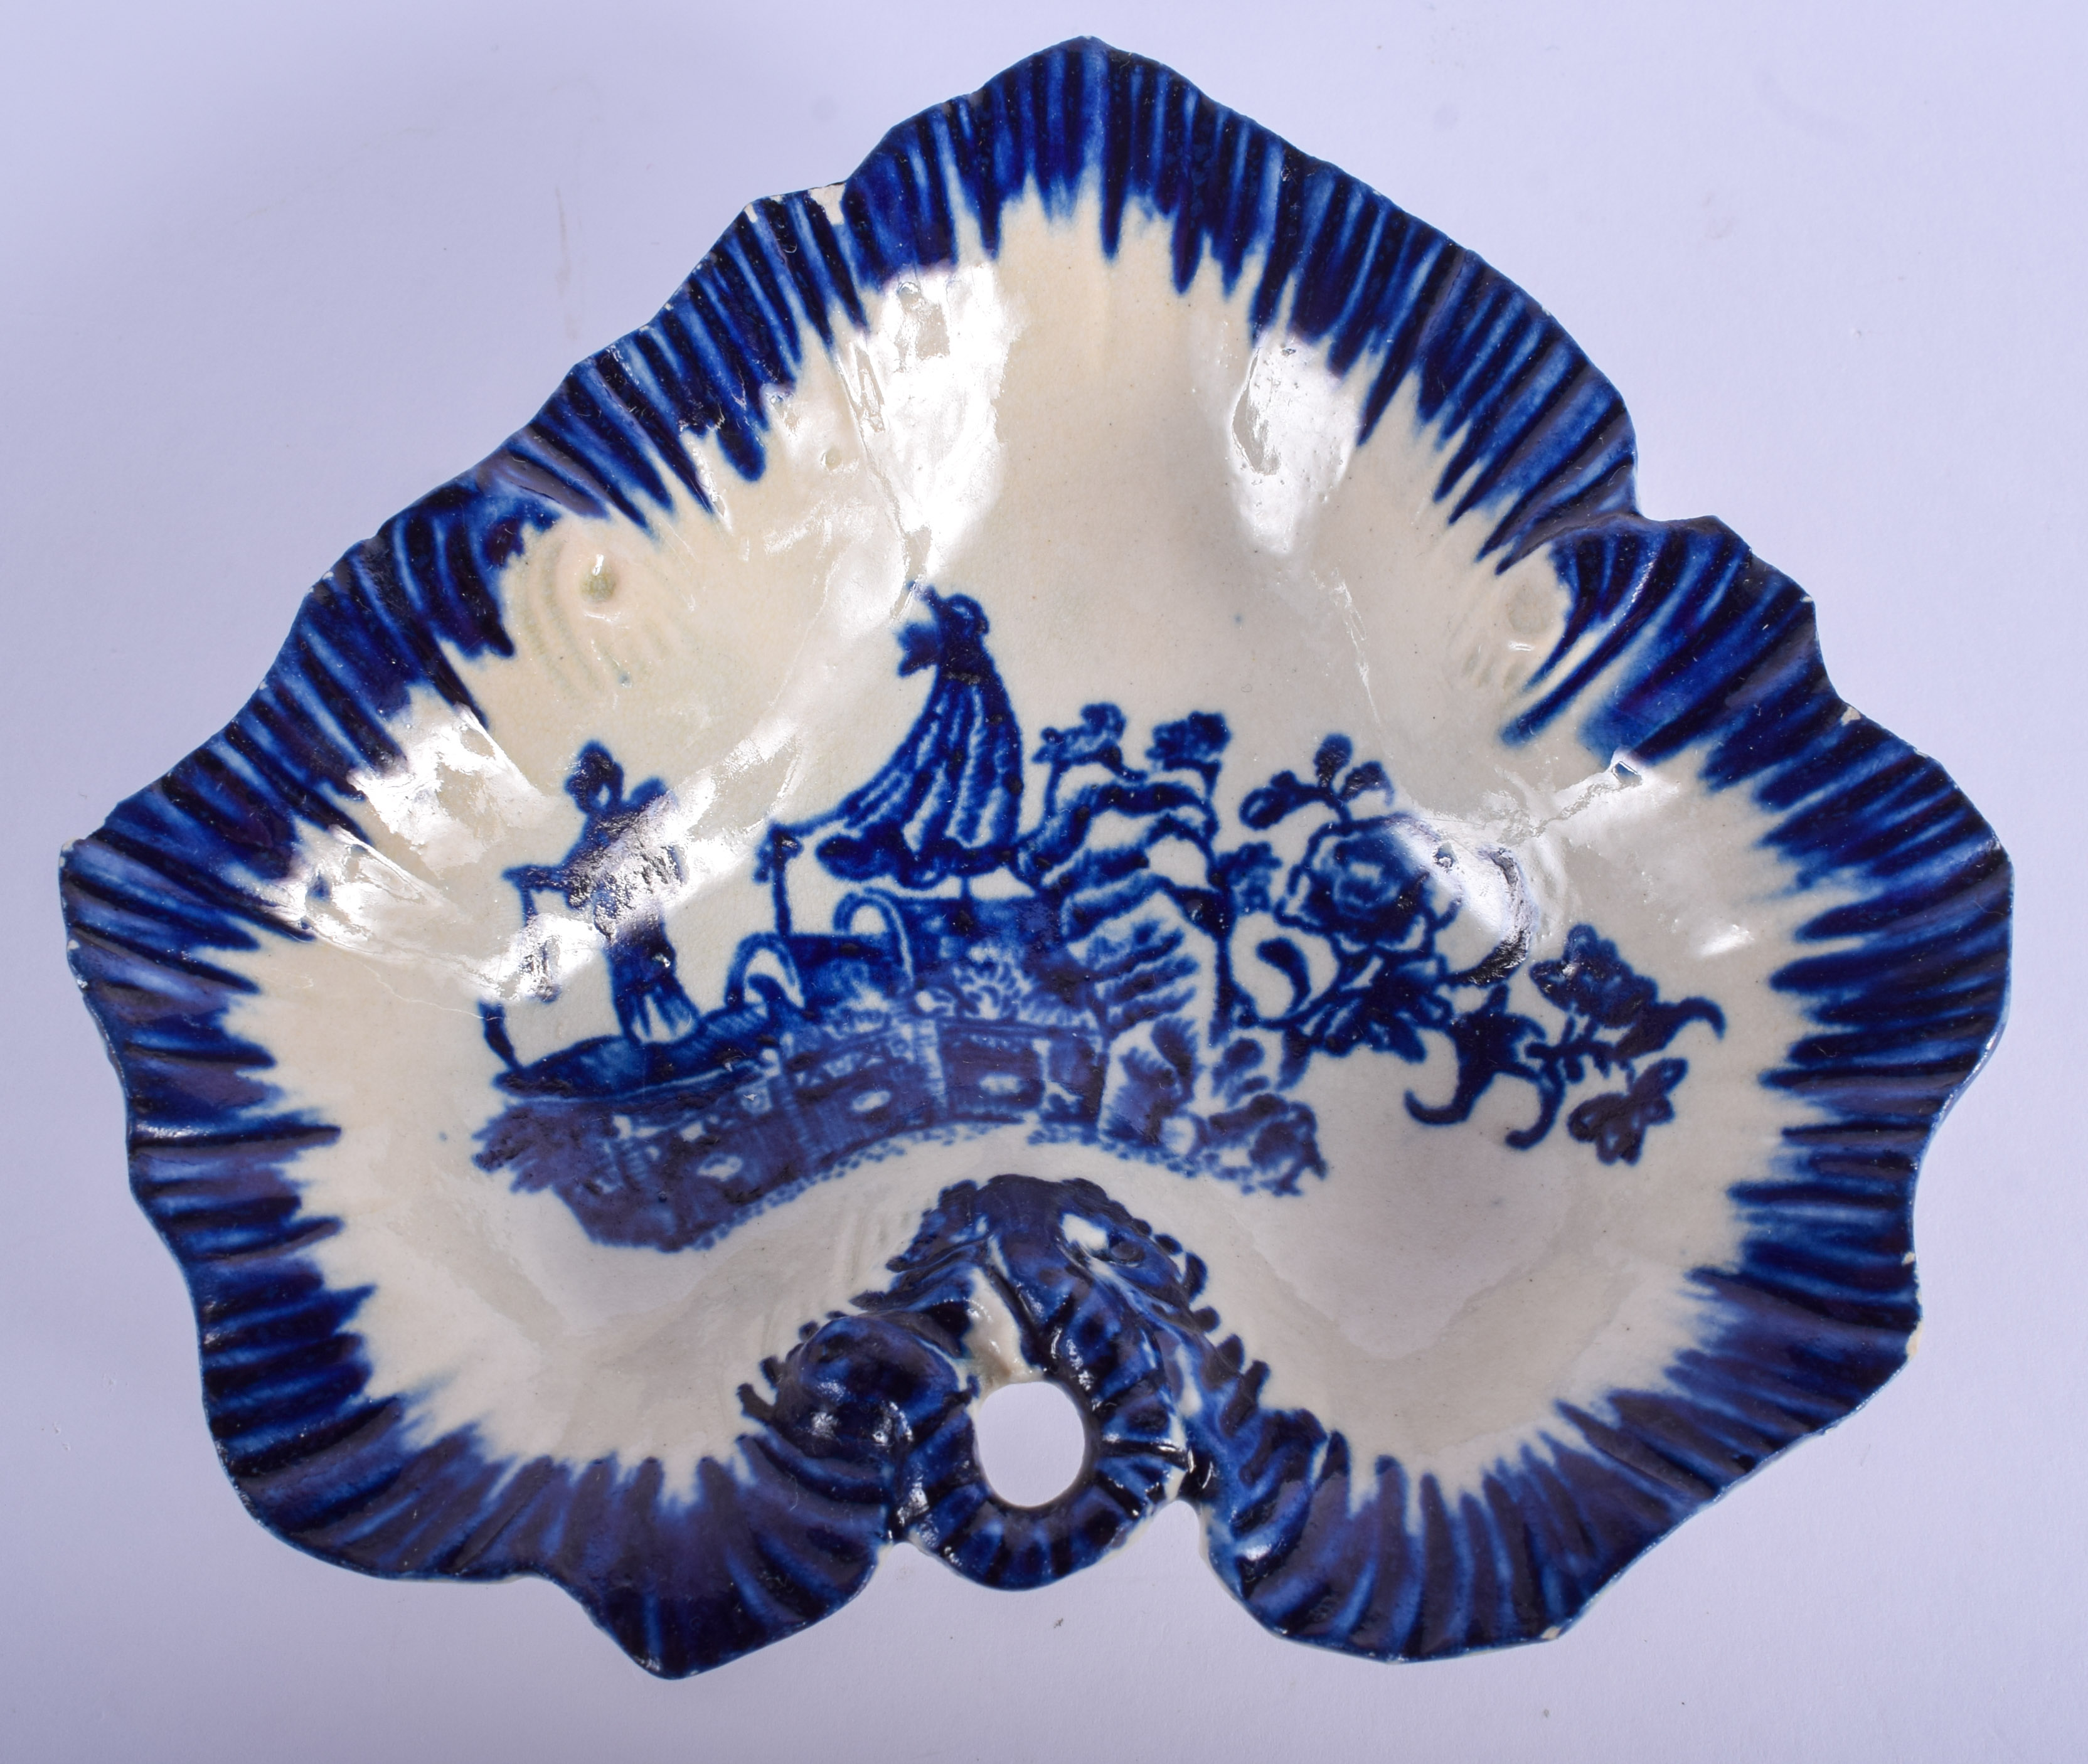 18th c. Liverpool leaf dish printed with the Fisherman pattern under a blue painted border. 13.5cm w